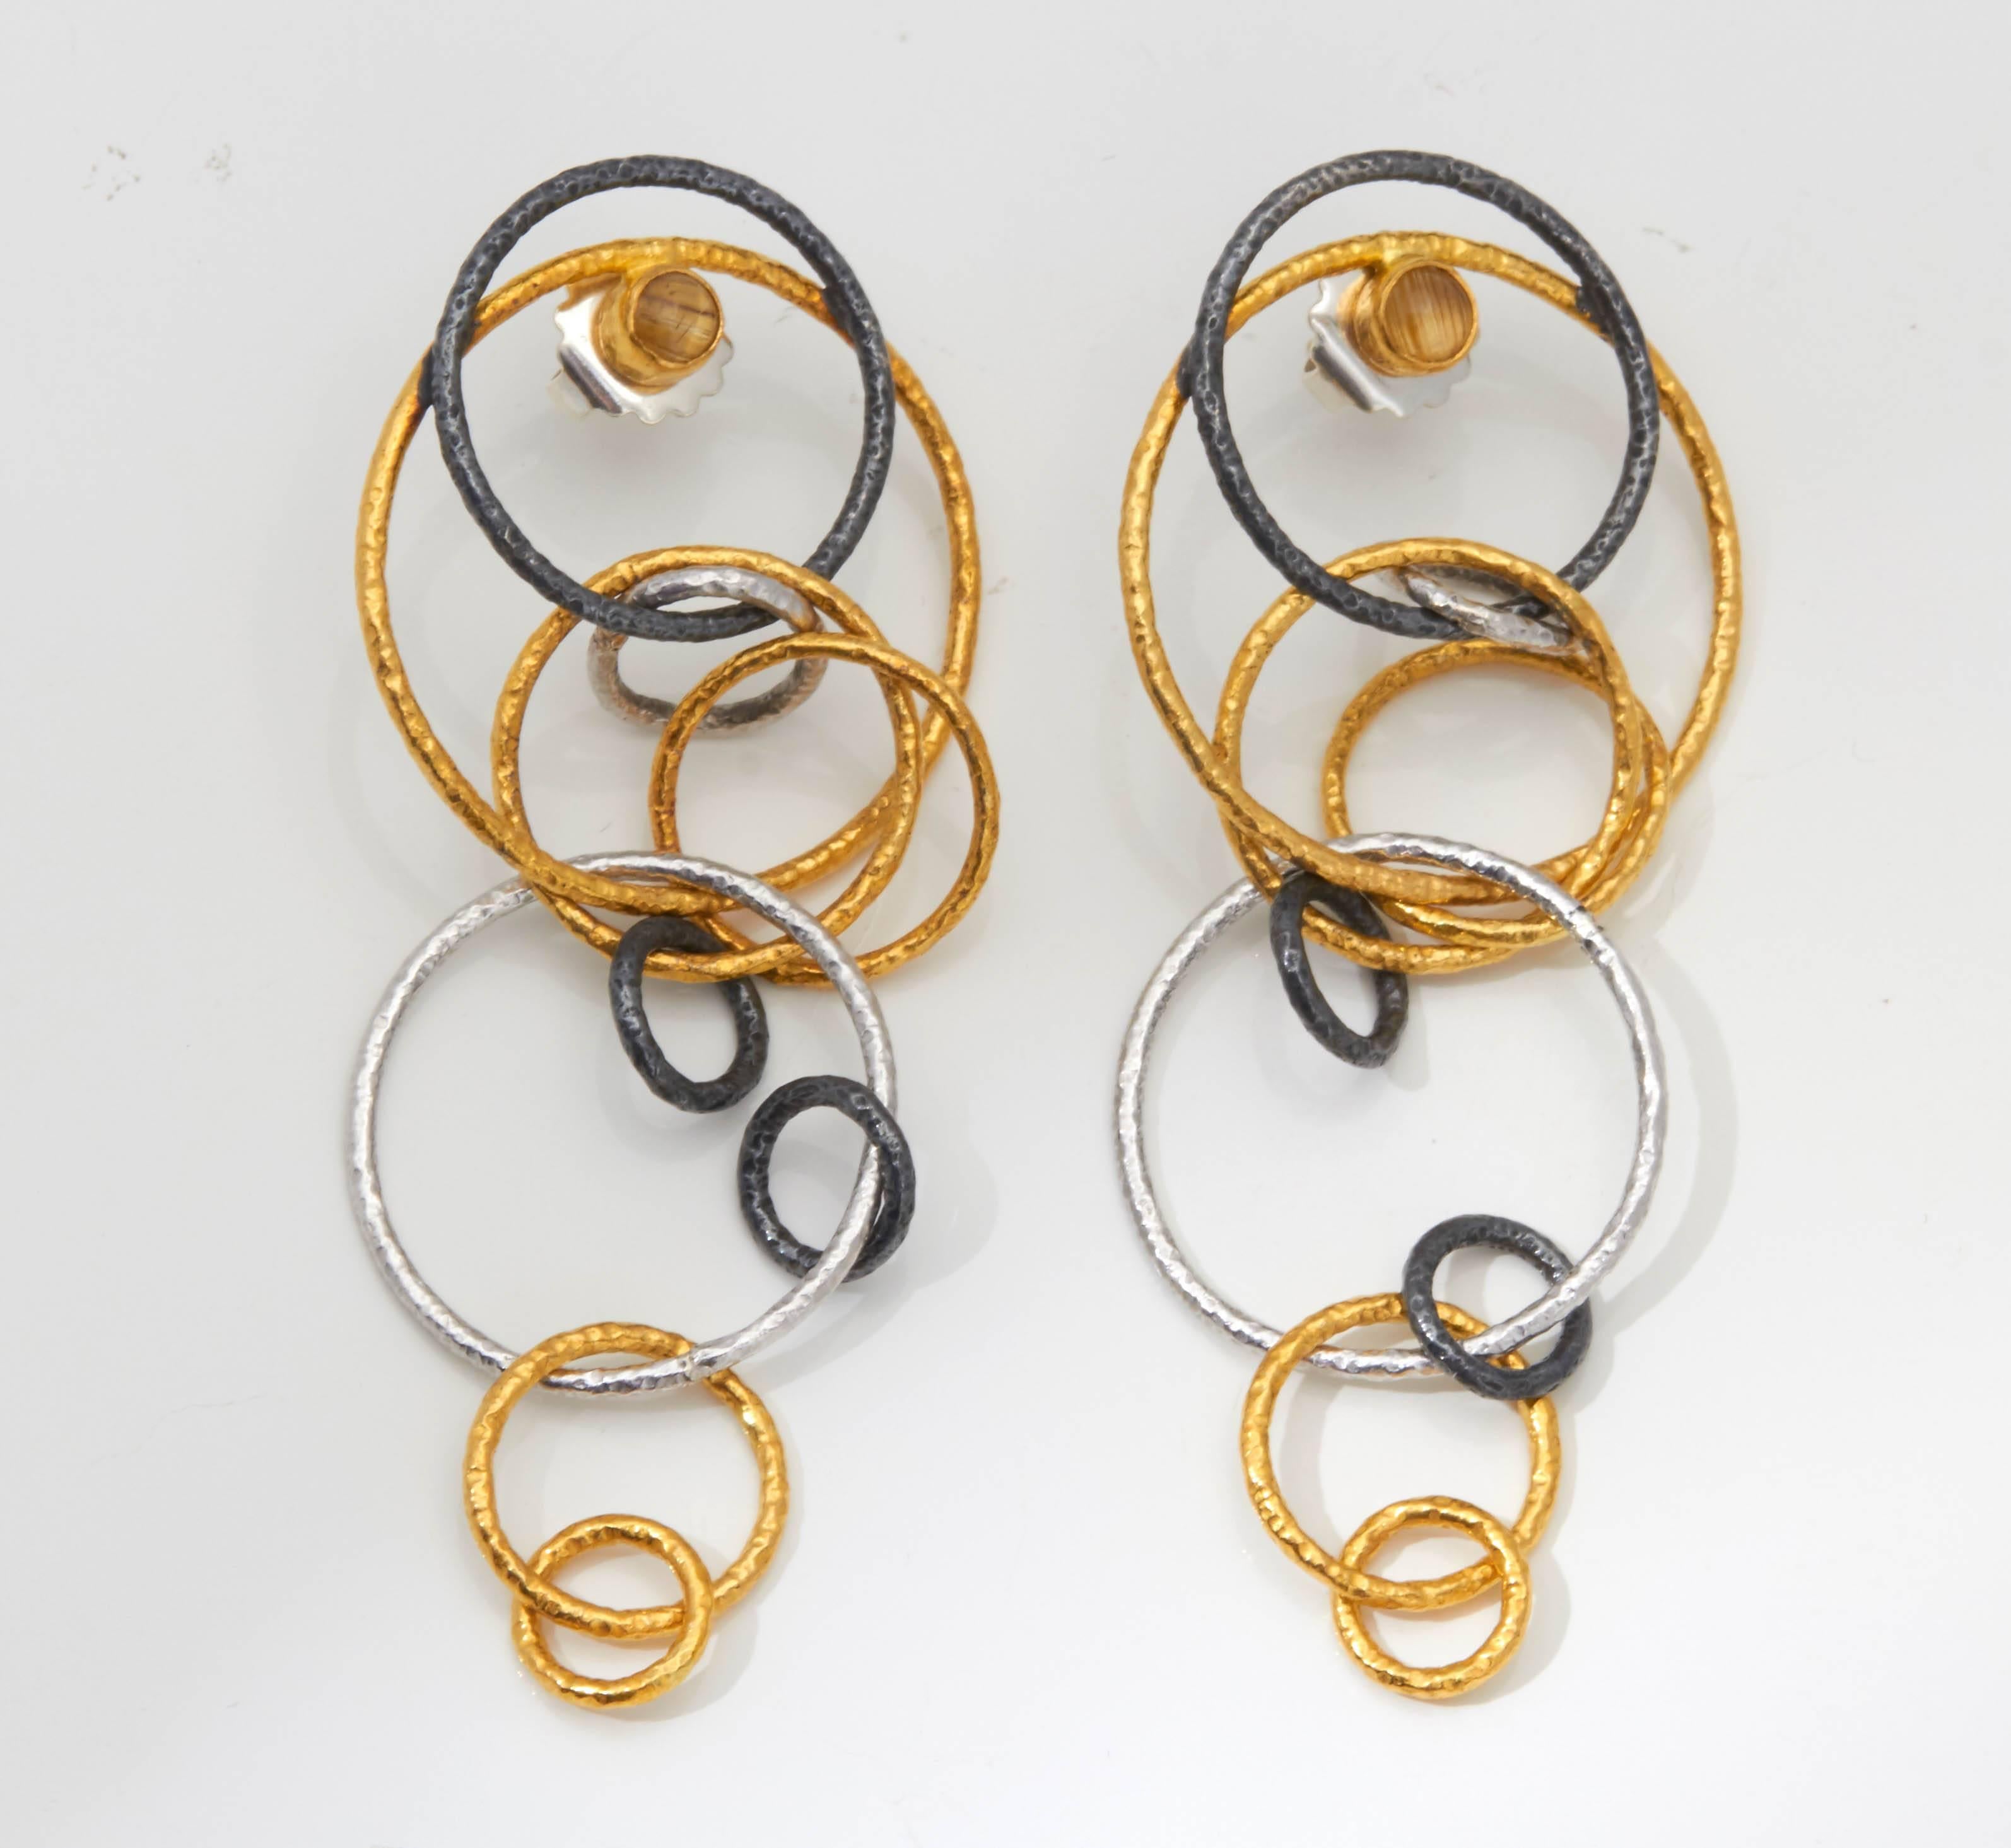 A pair of earrings composed of varying sizes of rings in 18kt yellow gold, sterling silver and rhodium plated silver. There is a bezel set chrysoberyl at the top of the earring.
Length: 3.50 inches
Width: 1.40 inches